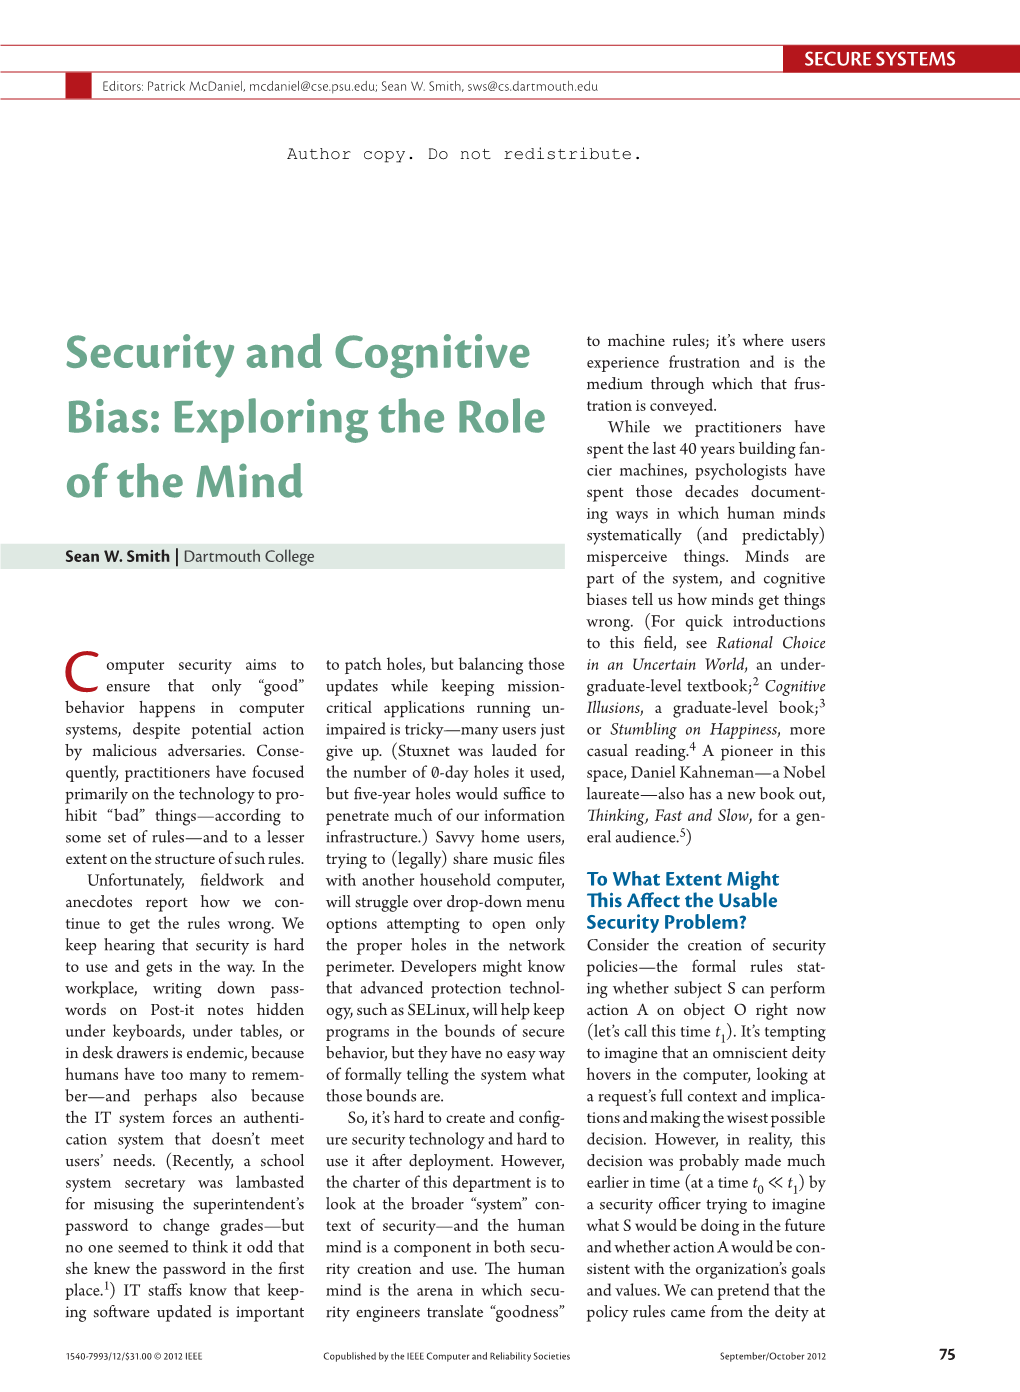 Security and Cognitive Bias